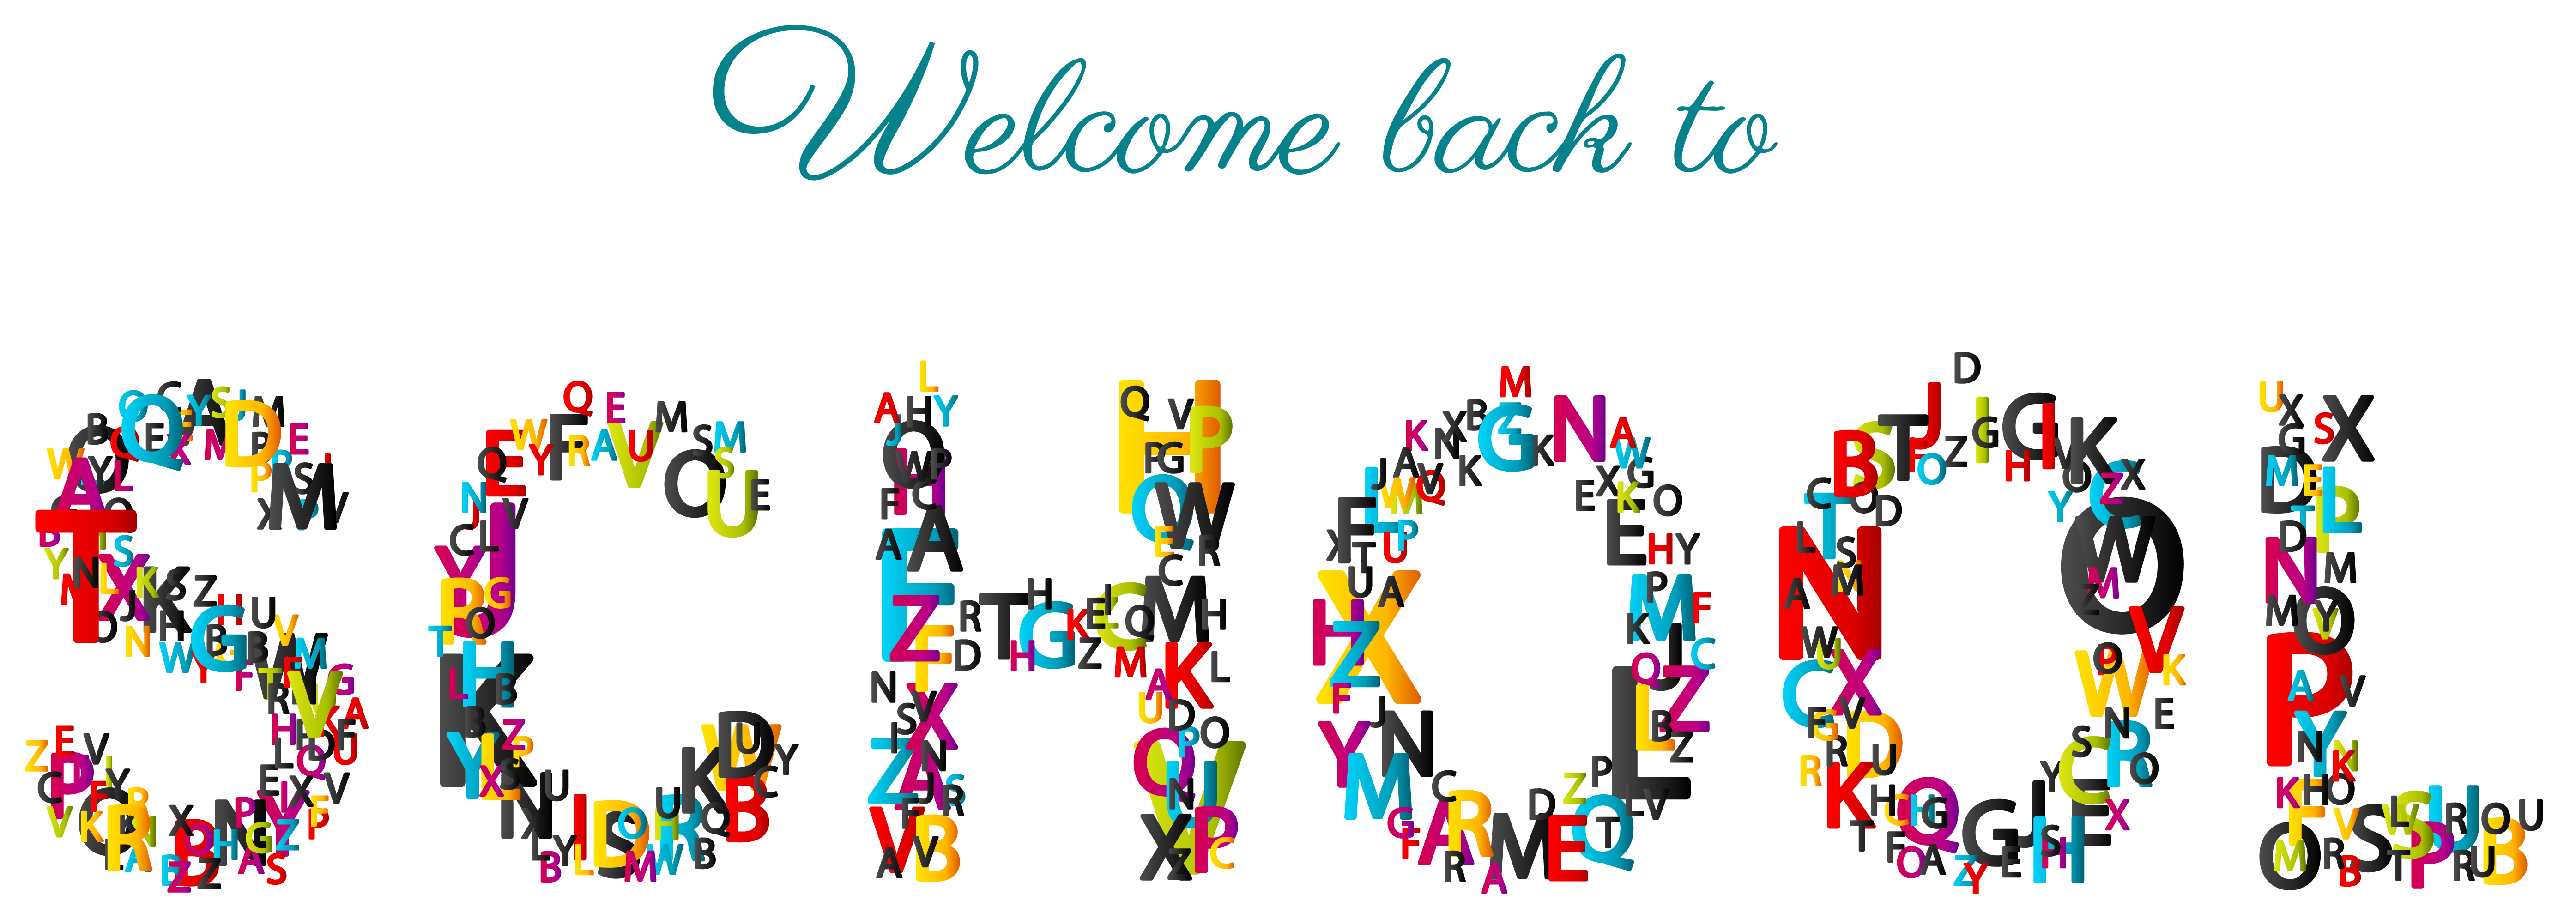 Welcome Back To School Picture Download Png Clipart